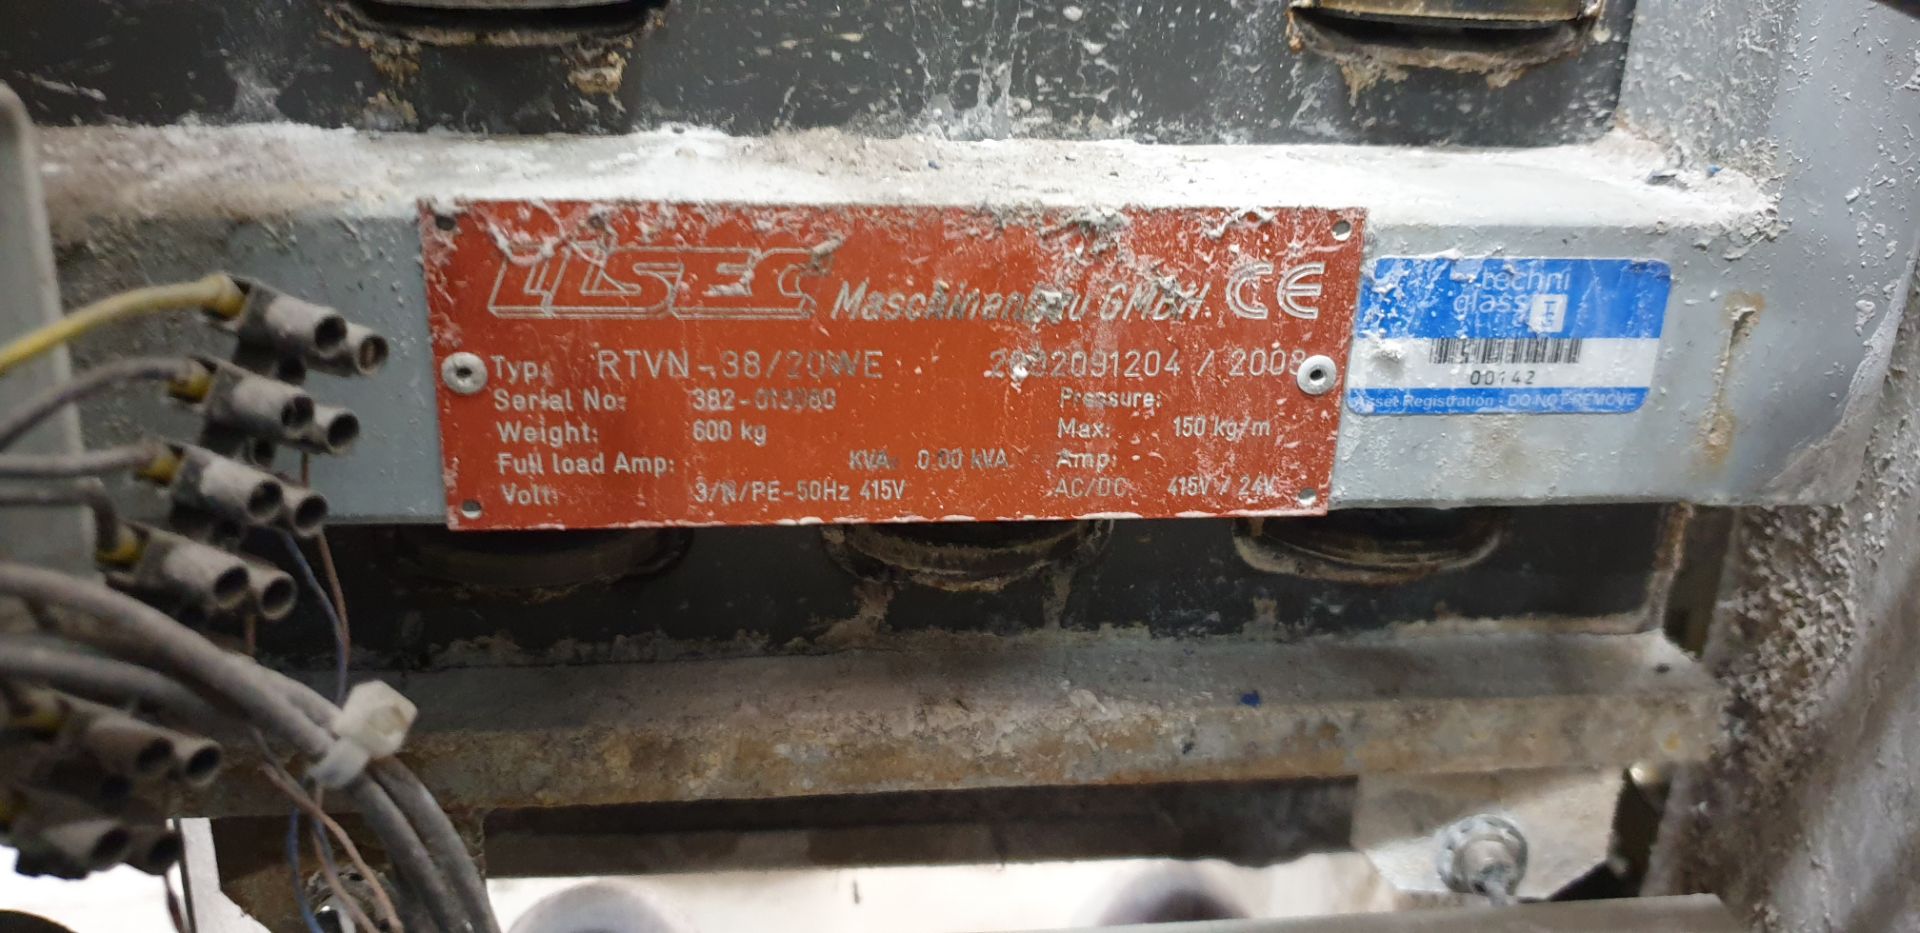 1: Lisec RTVN-38/20WE Arrising and Wash Line Serial Number: 383-013080 Year of Manufacture: 2008 Com - Image 5 of 13